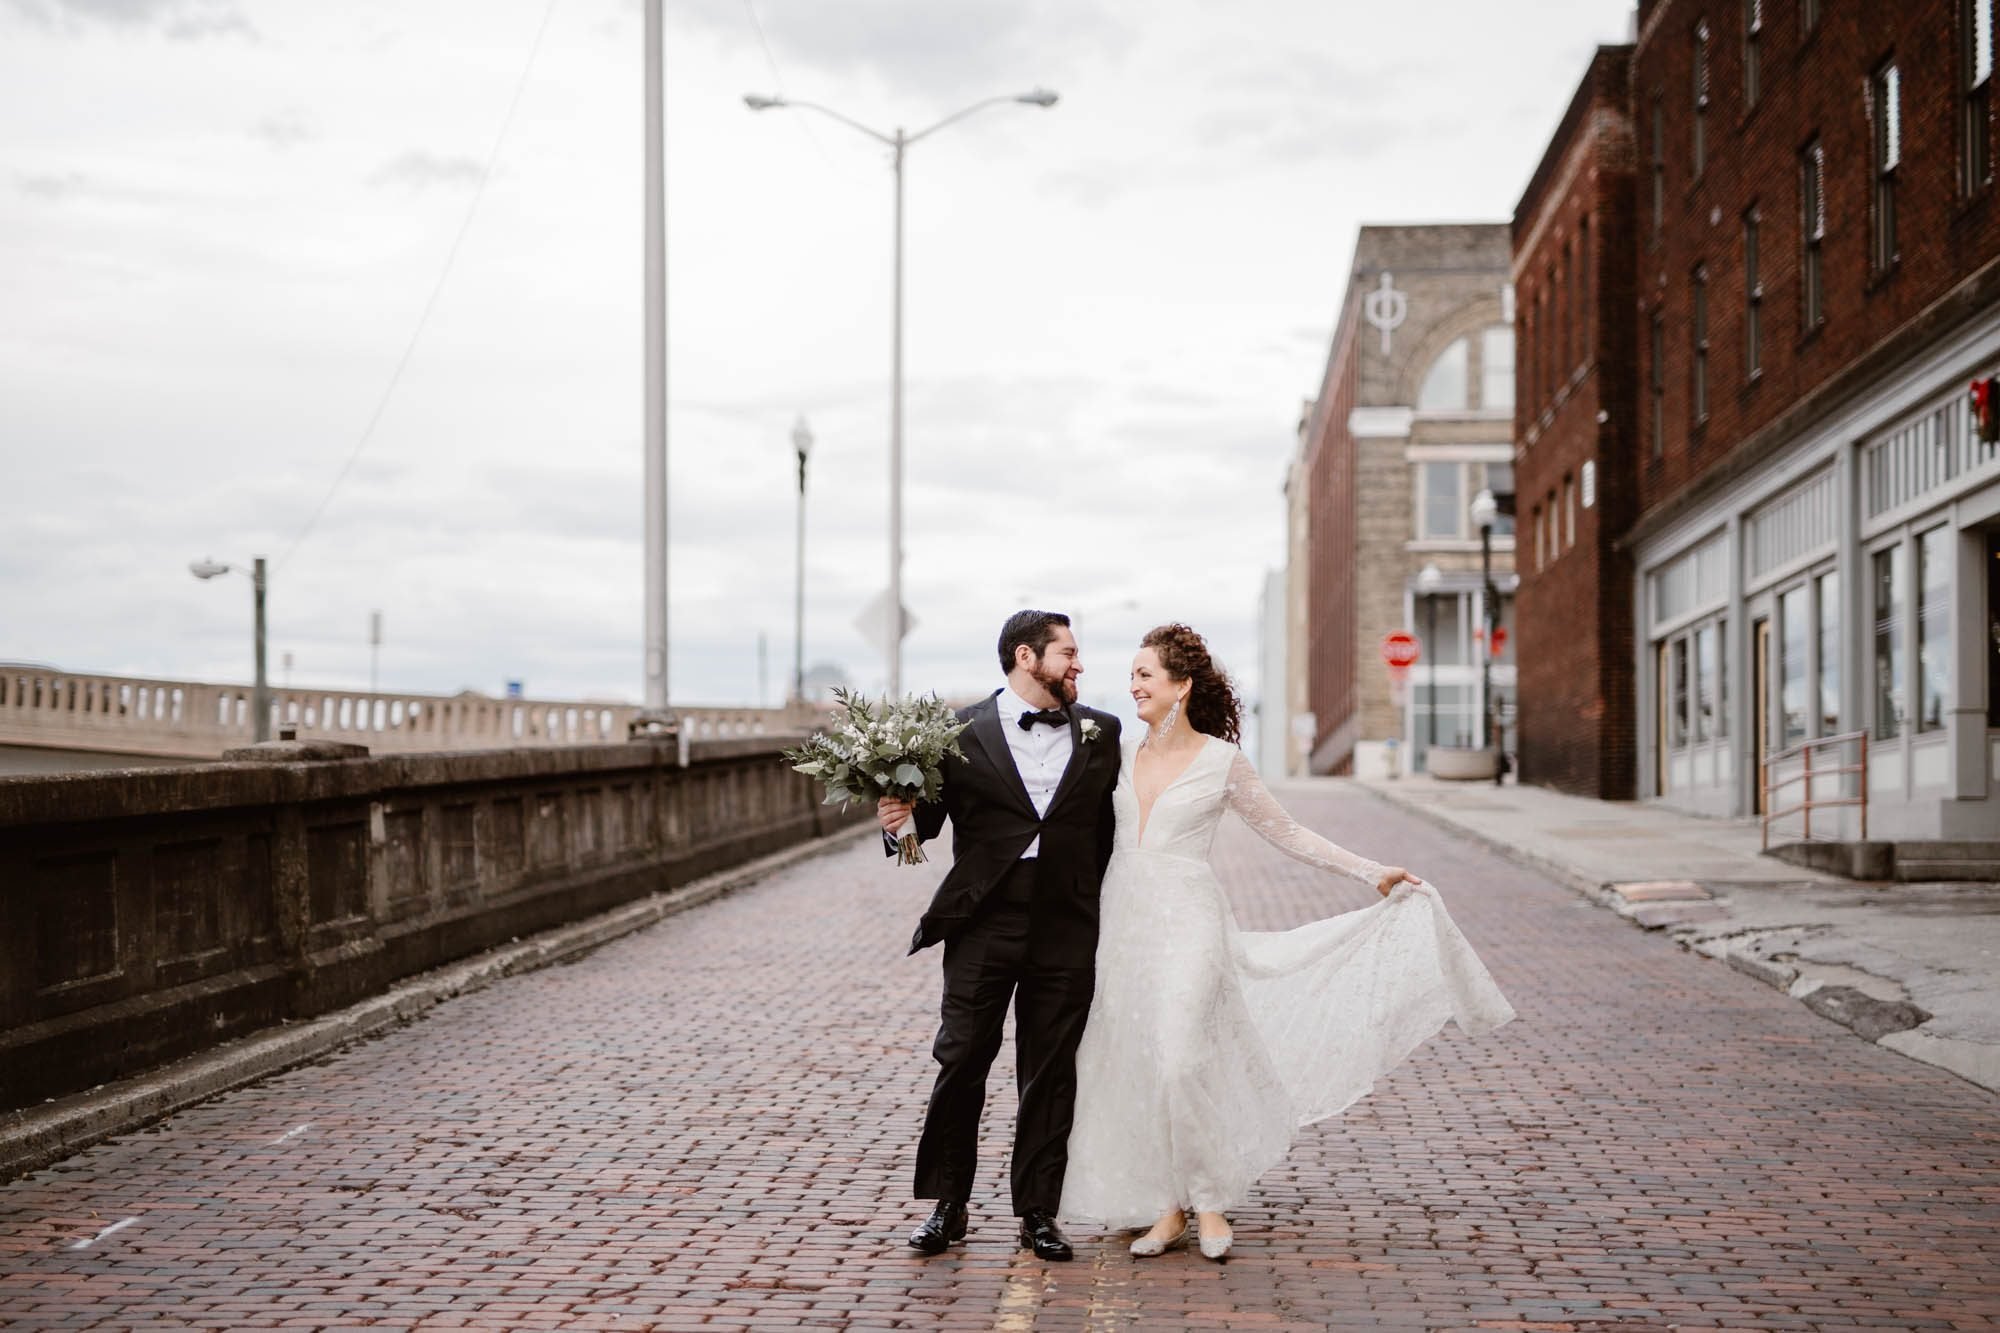 Downtown Wedding at The Emporium Center Knoxville